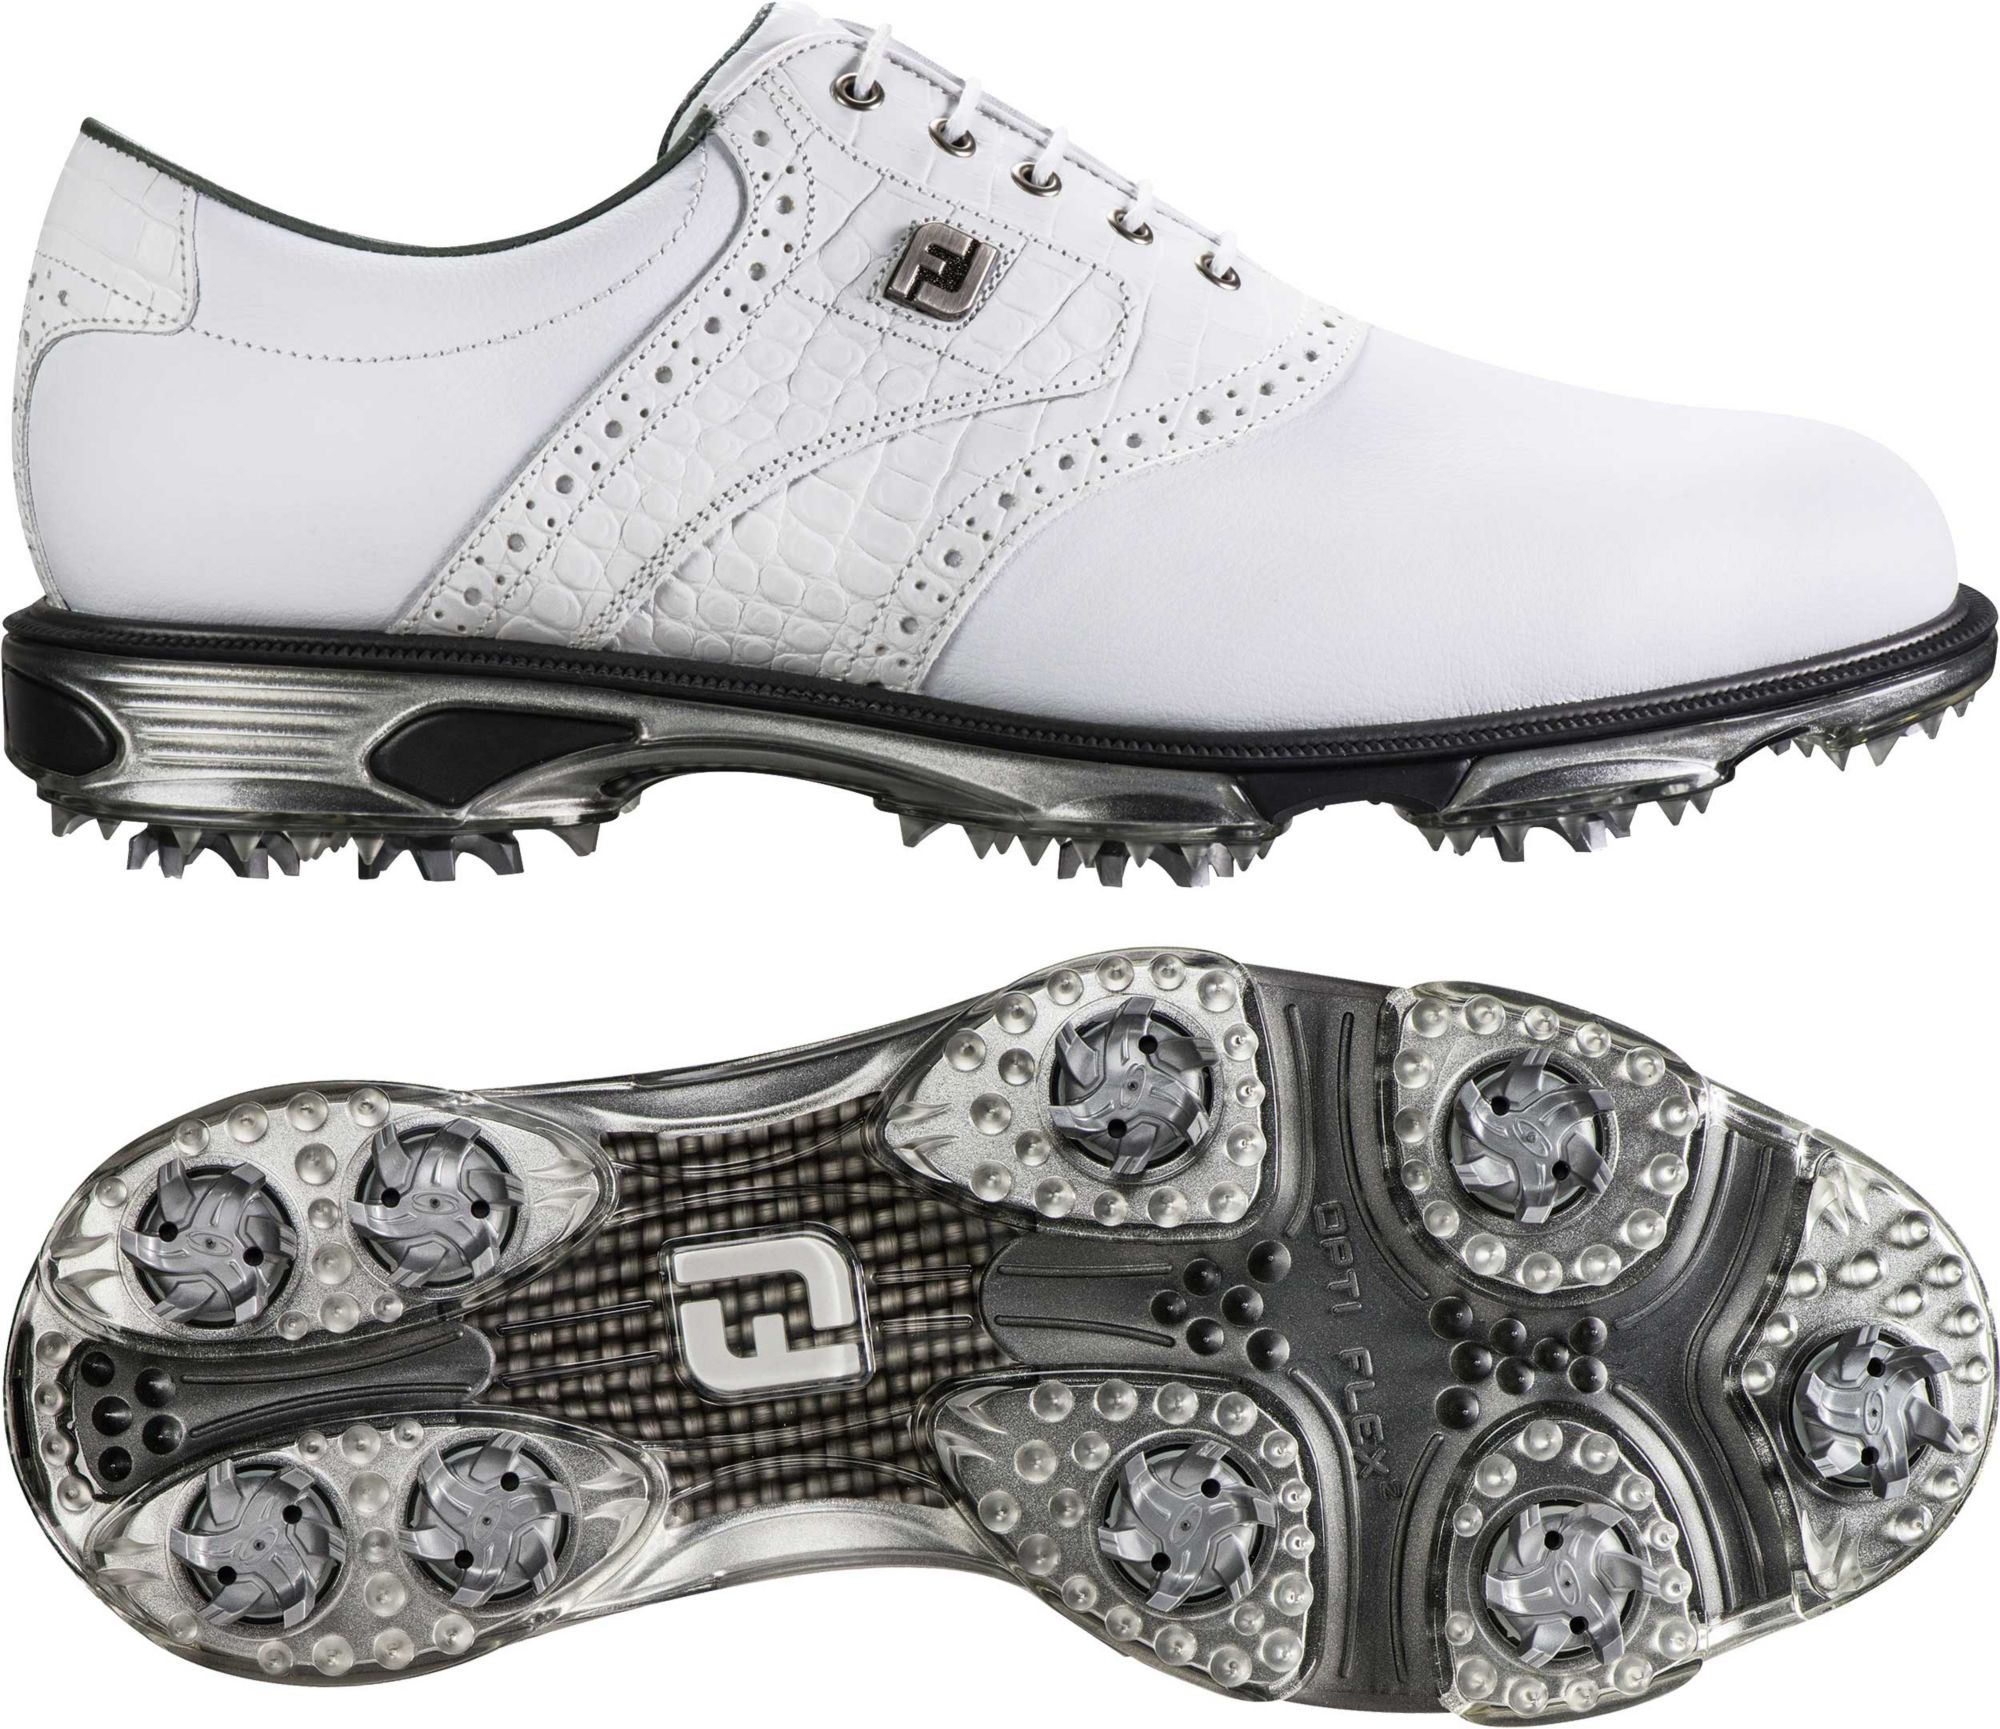 footjoy golf shoes clearance